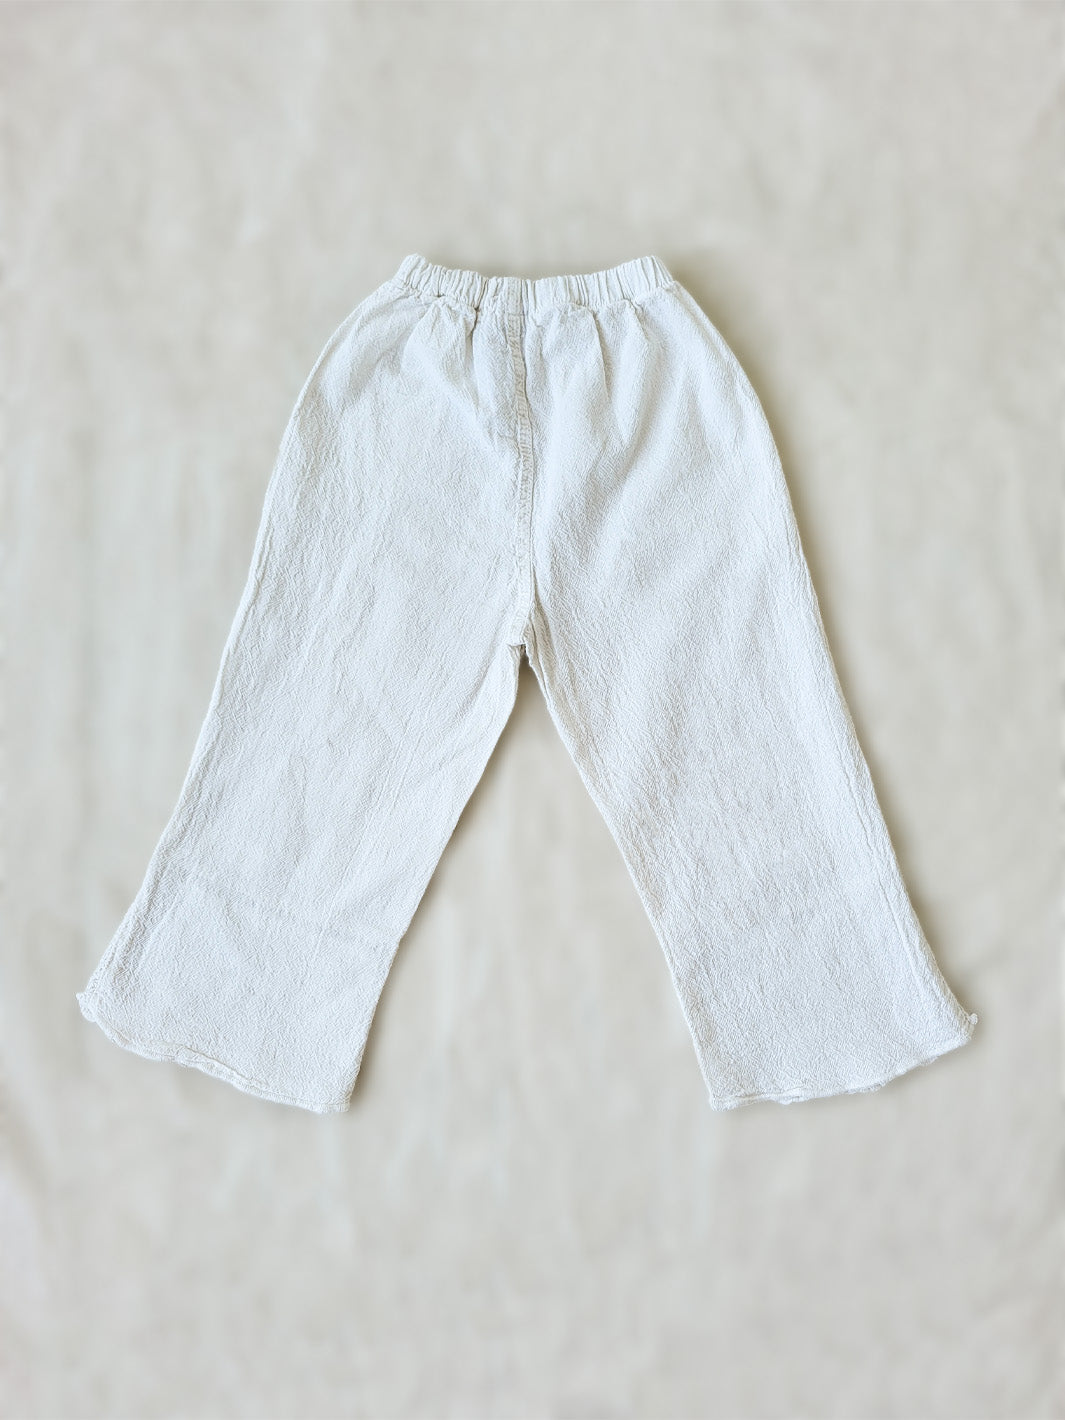 Liten Aventuris brand. Keep your little girl comfy and stylish in our Annie Pants! These natural cotton pants feature playful knitted cotton patterns at the bottom for added breeziness. With front pockets for keeping those special treasures! The soft material will keep your young one feeling silky. Pair this loose-fitting design with our Annie Blouse for the perfect winning combo! Flickan Byxor, Barns bomullskläder, svenska kläder, flickans byxor, ekologisk kläder, babis byxor.